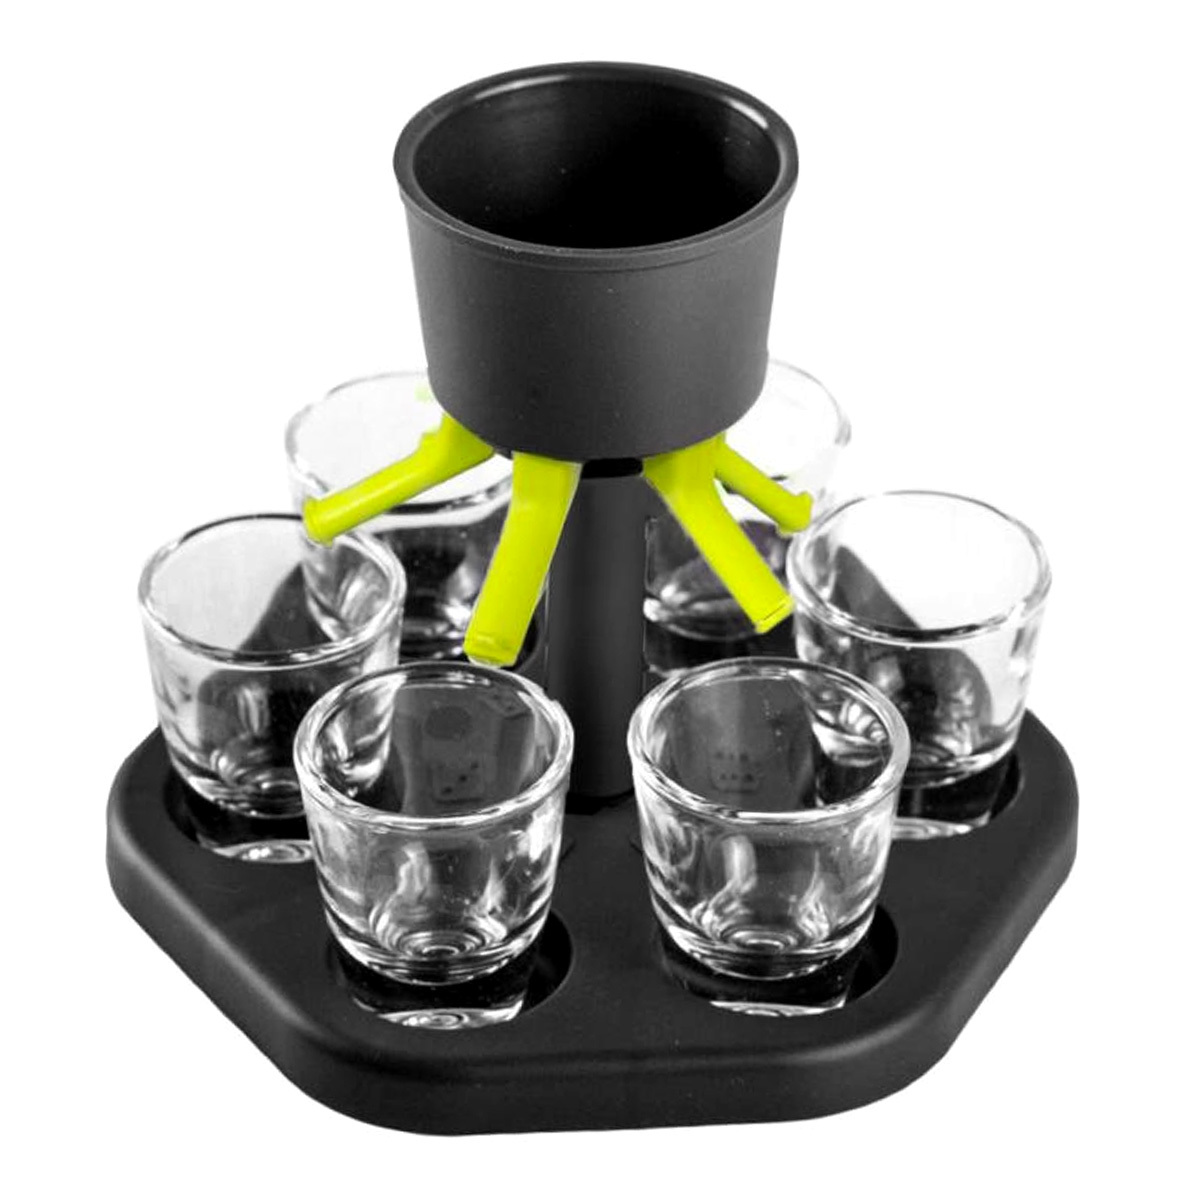 

1pc, 6 Dispenser And Holder, Multiple Shot Dispenser With 6 Drinking Glasses, Dispenser For Filling Liquids Dispenser For Outdoor Party And Bar, Party Supplies,